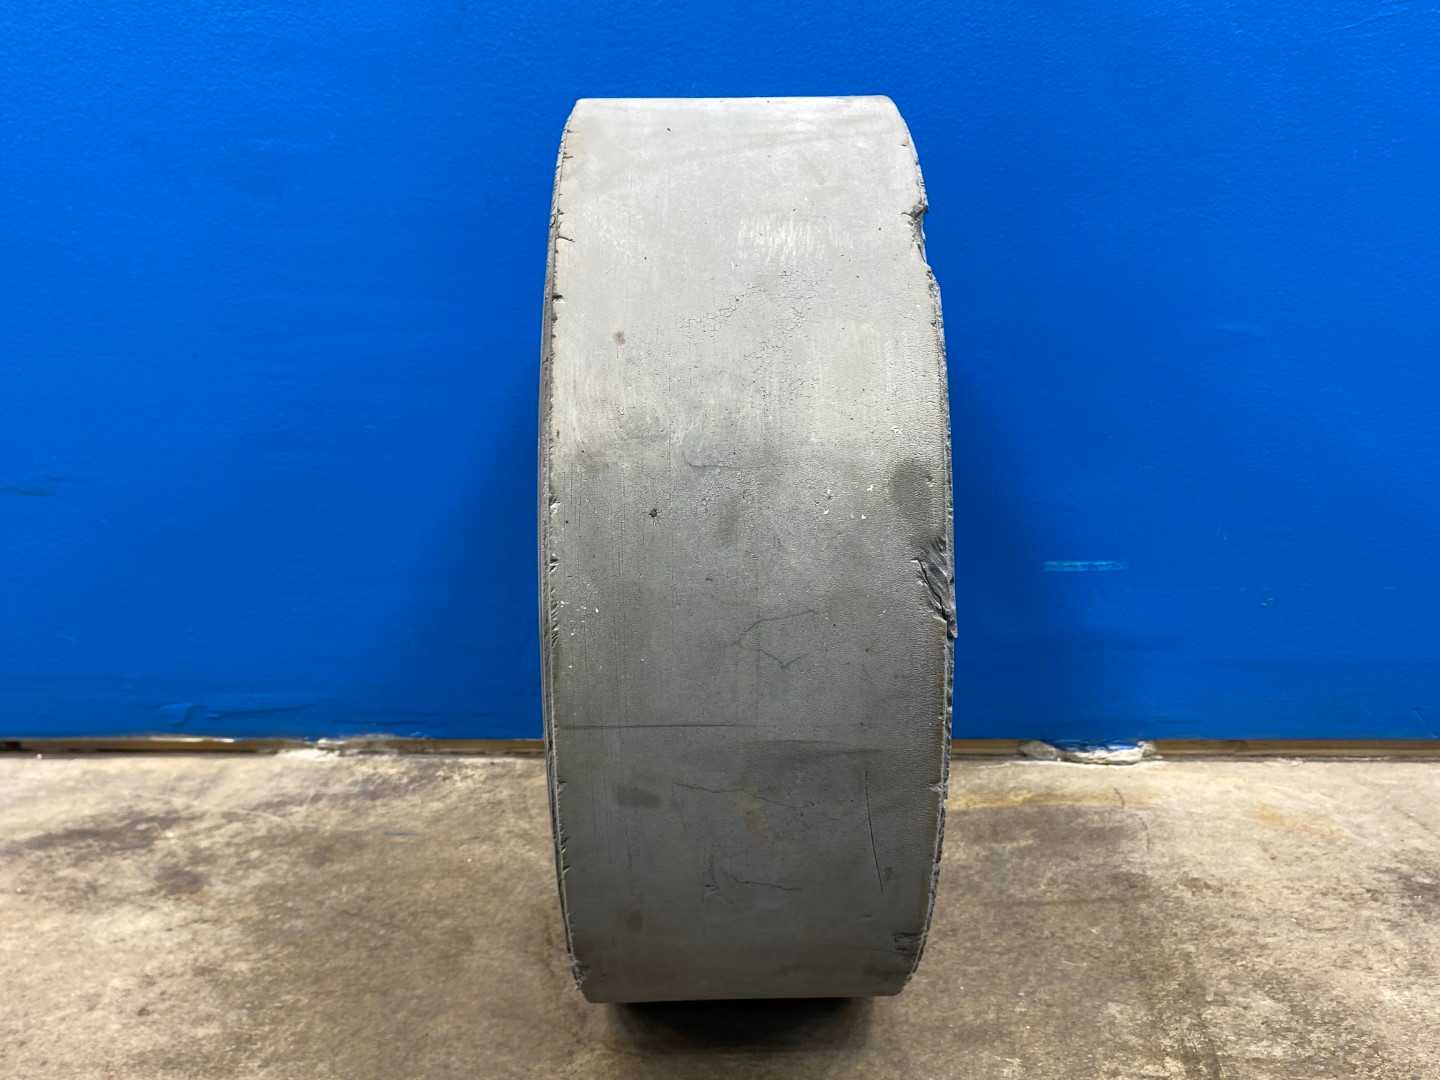 Unitrac Solid Cushion Forklift Tires with Rims 21x7x15 set of 2